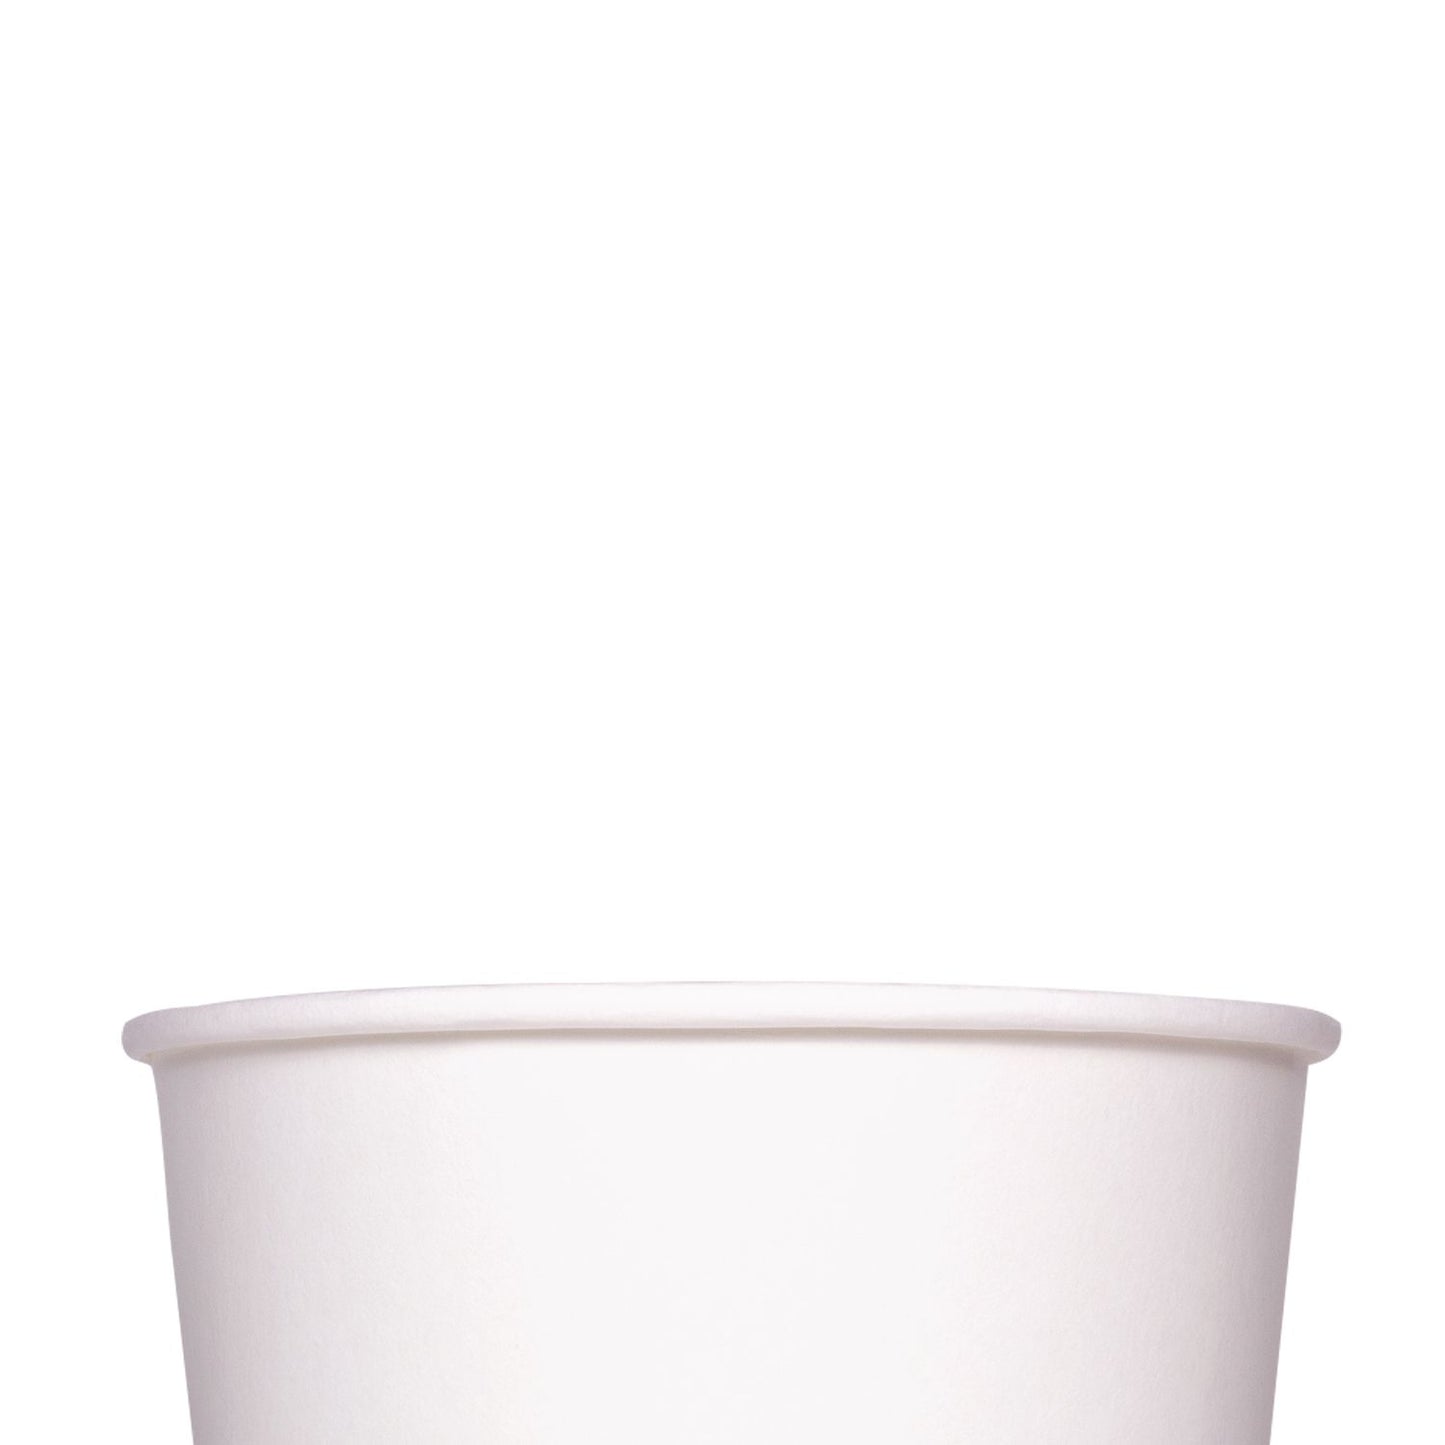 Karat 32oz Food Containers - White (142mm) - 600 ct